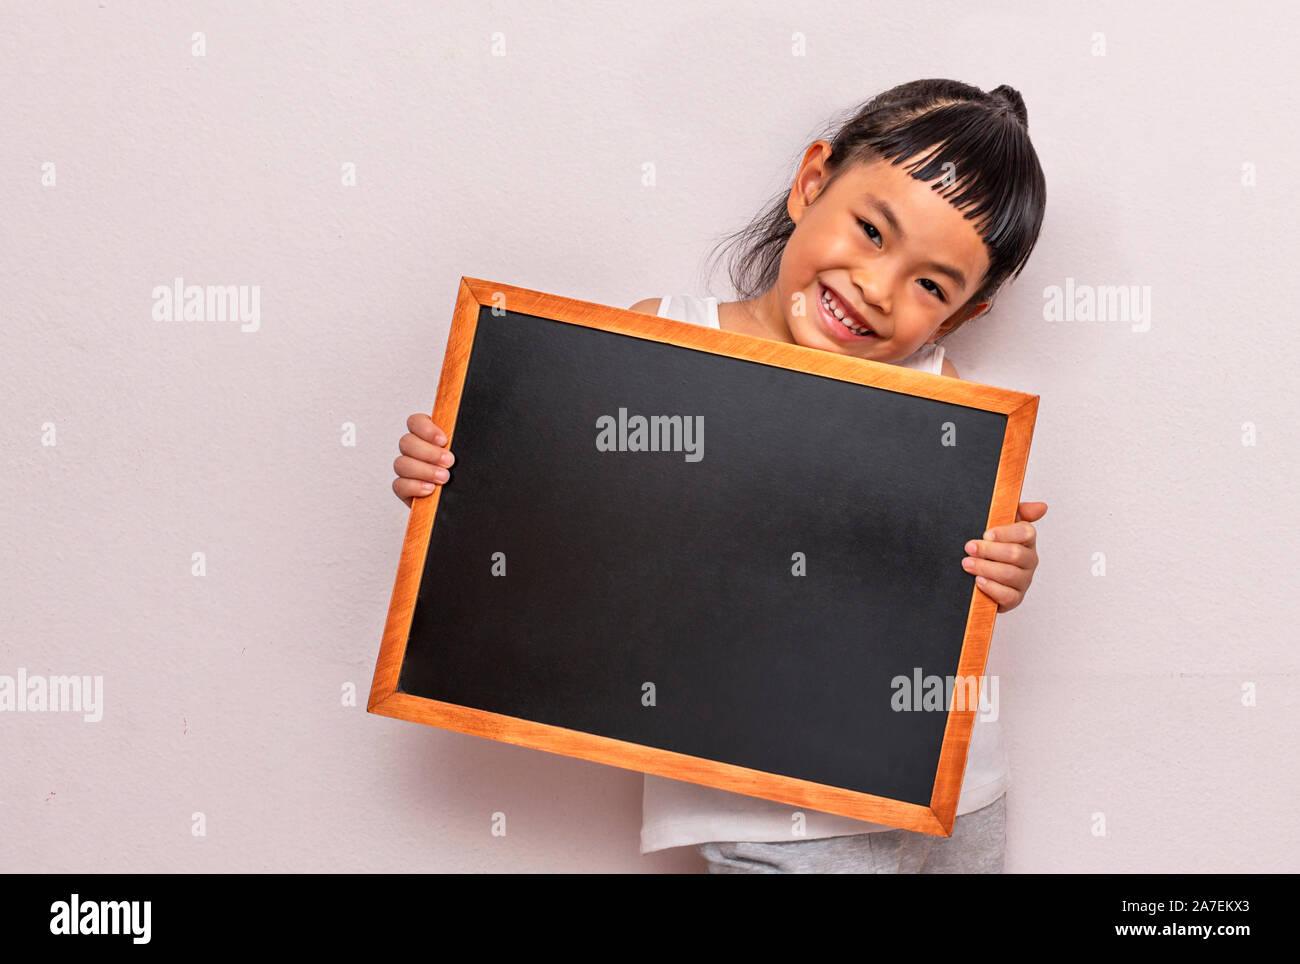 Child holding blank black board. Back to school concept. Wearing white cloth. Looking at camera. Big smile face. Stock Photo